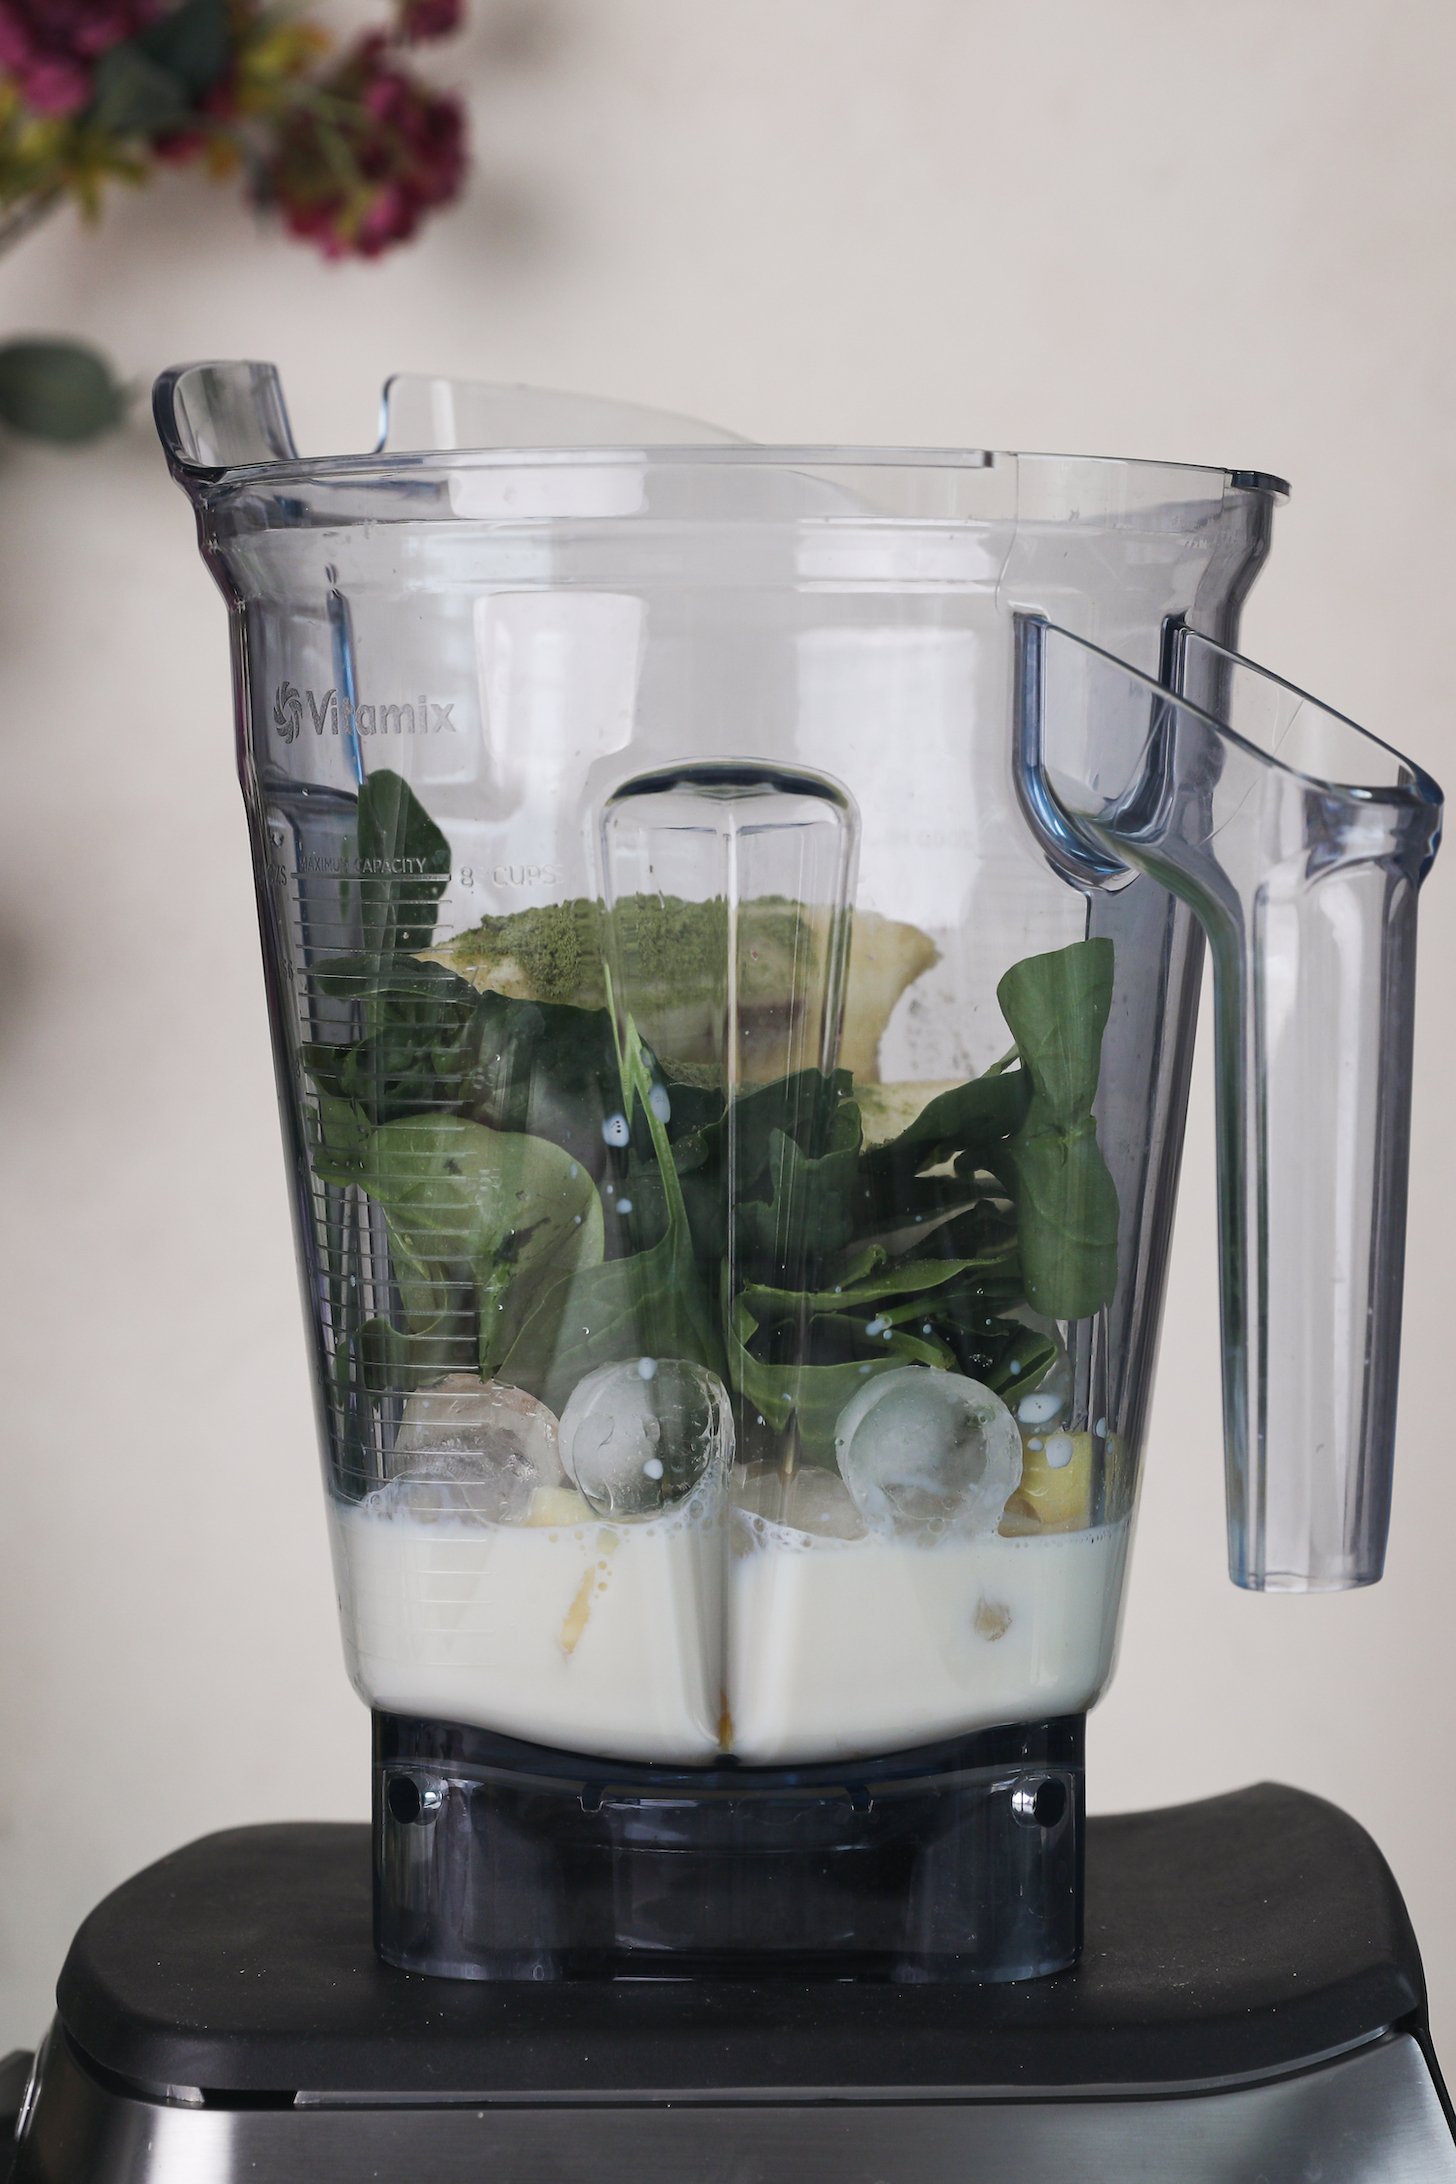 Perspective image of a blender filled with leafy greens, ice cubes, milk and a green powder.